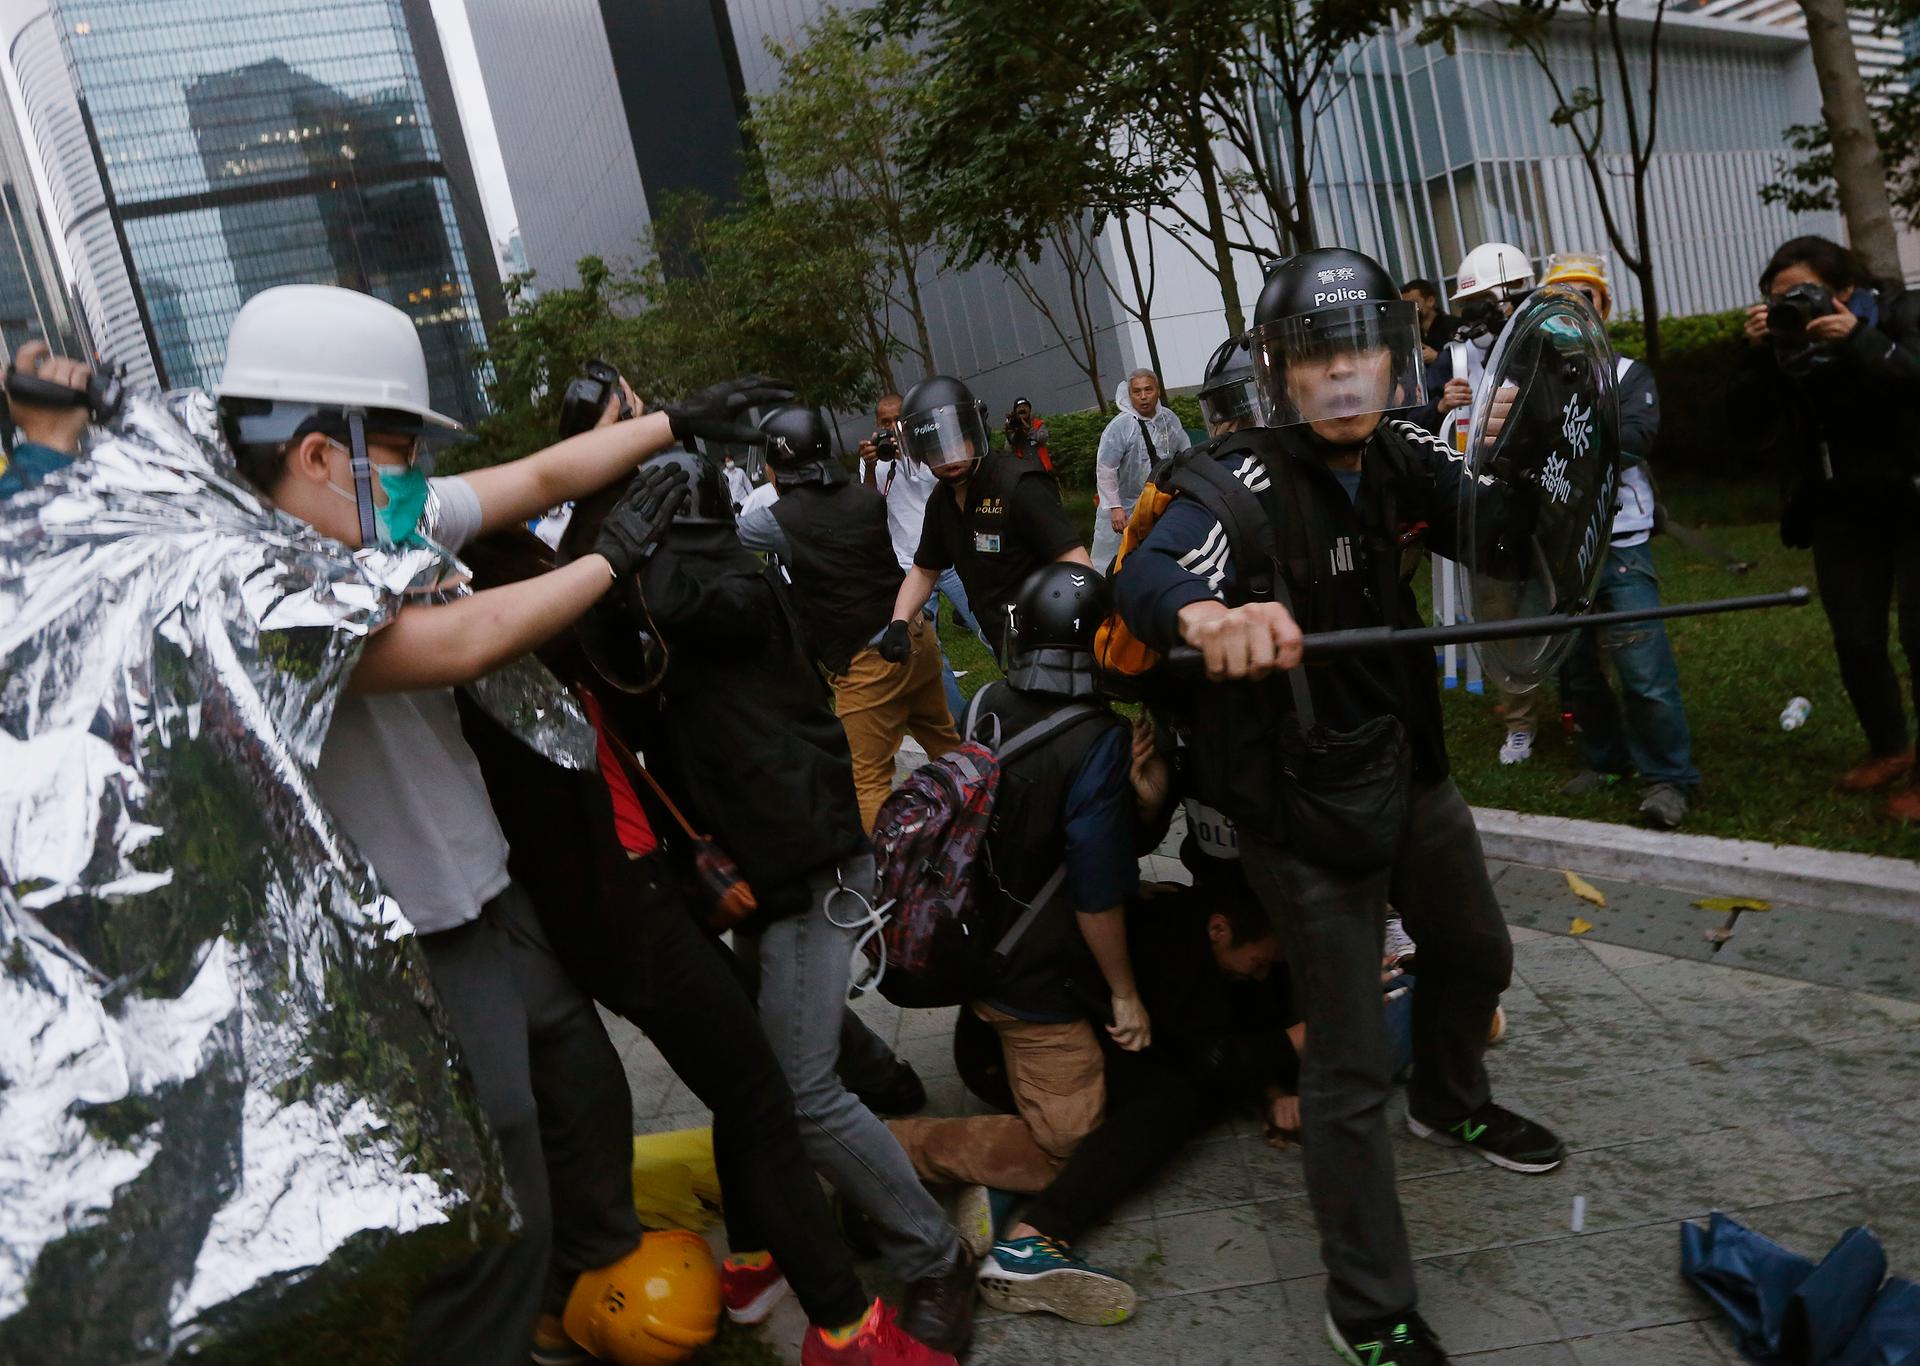 Hong Kong police baton-charged and pepper-sprayed thousands of pro-democracy demonstrators in the early hours of December 1, 2014. The protesters were trying to encircle government headquarters, defying orders to retreat after more than two months of prot